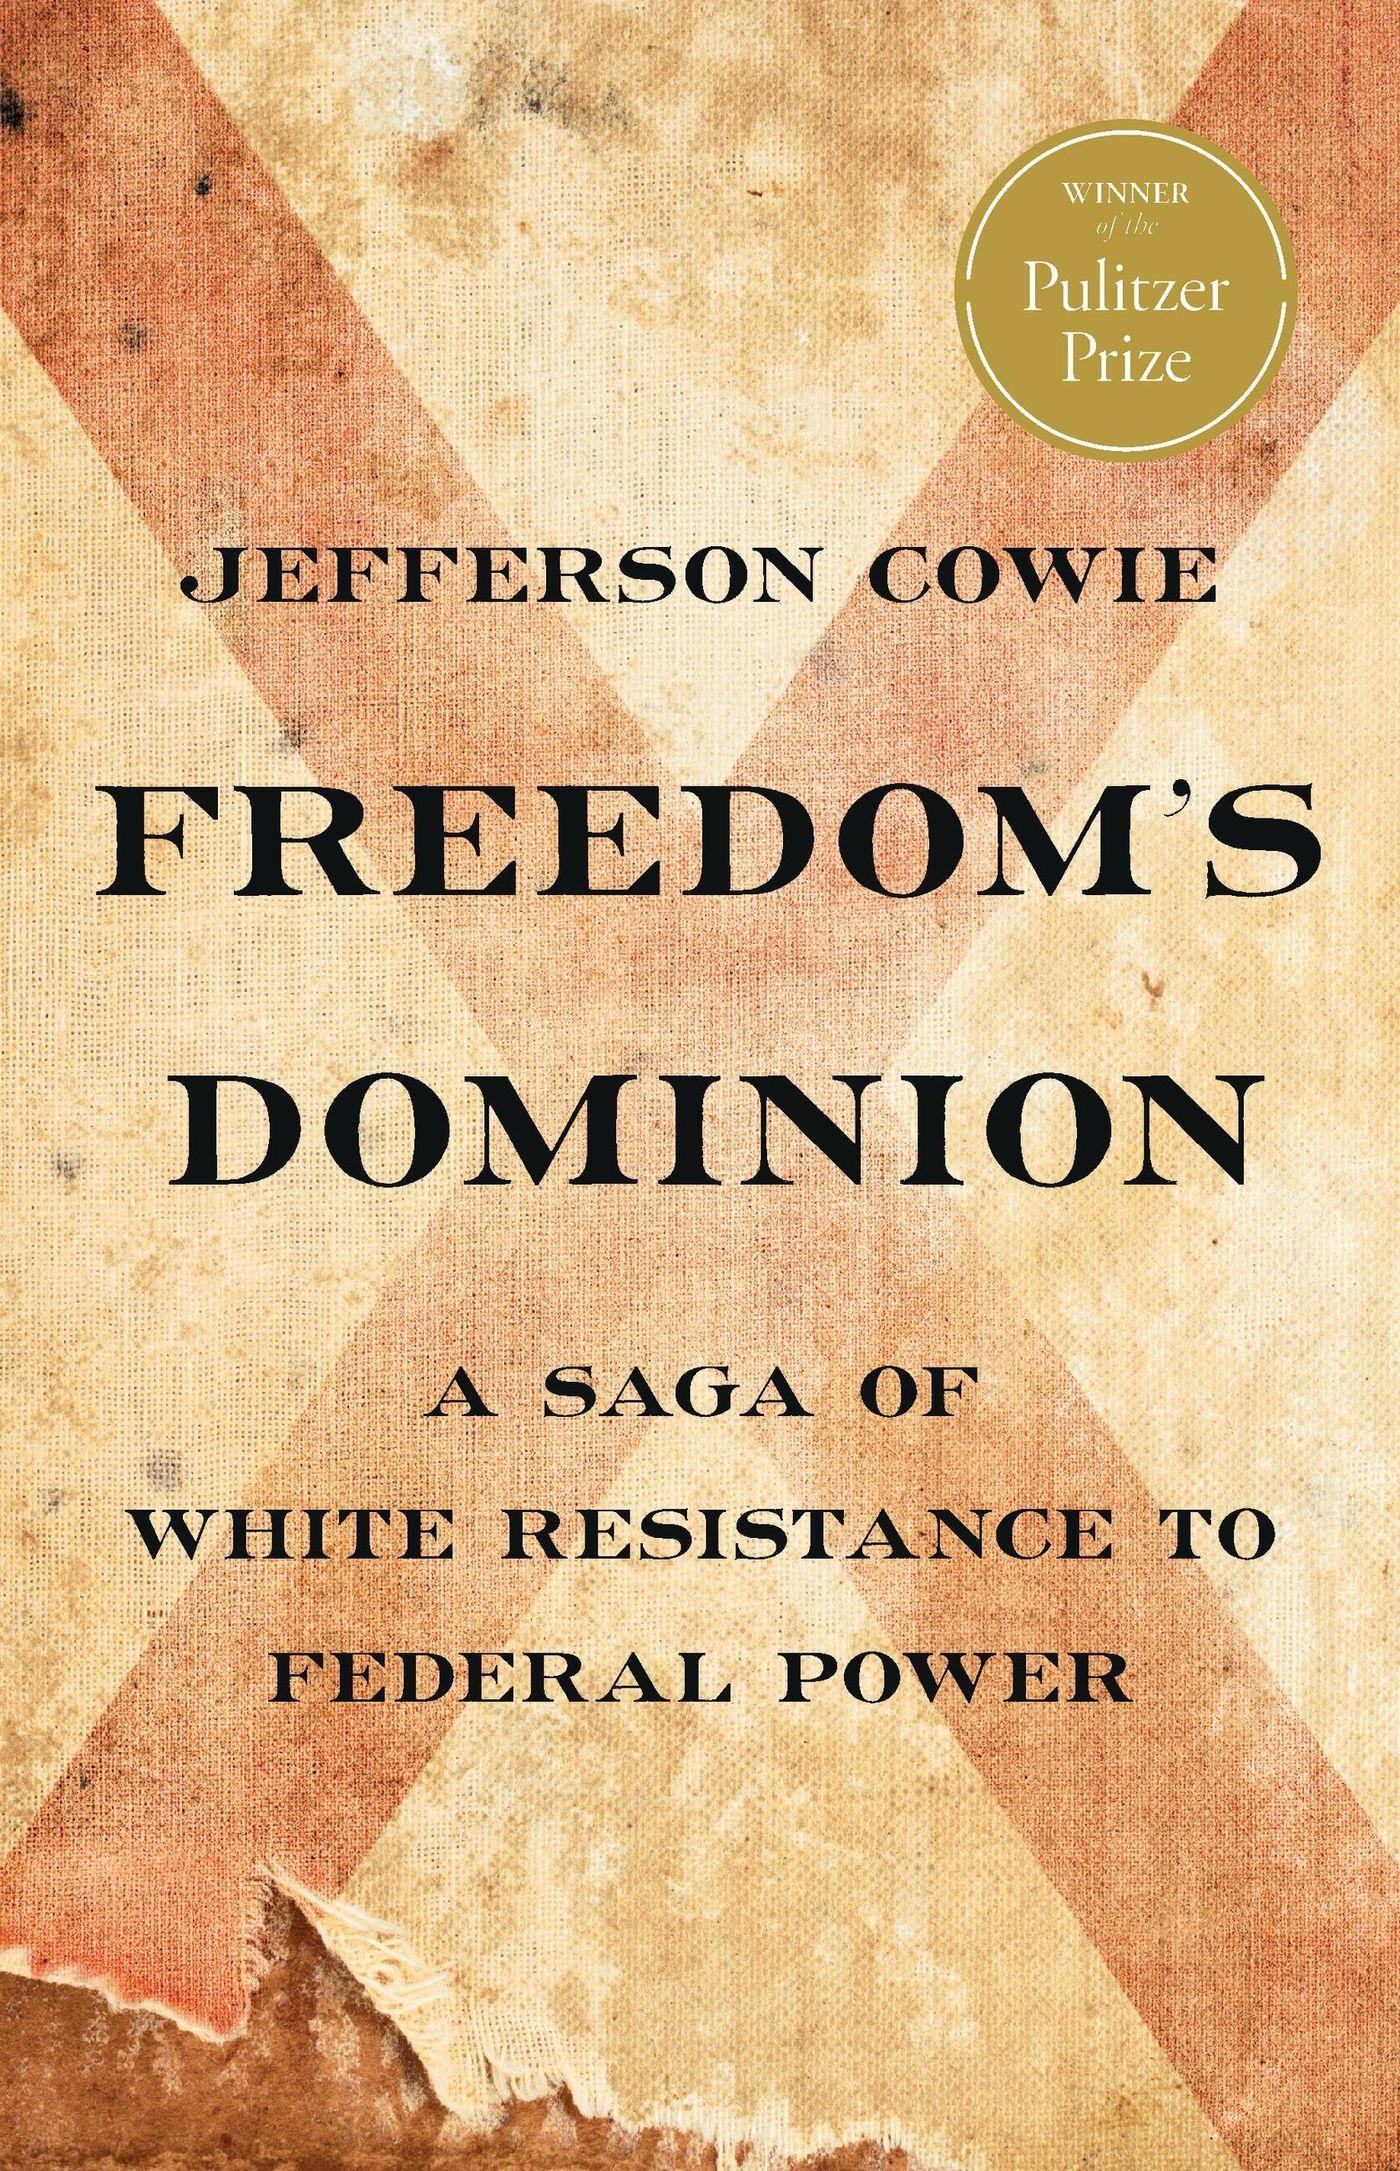 Freedom's Dominion (Winner of the Pulitzer Prize) / A Saga of White Resistance to Federal Power / Jefferson Cowie / Buch / 512 S. / Englisch / 2022 / Basic Books / EAN 9781541672802 - Cowie, Jefferson